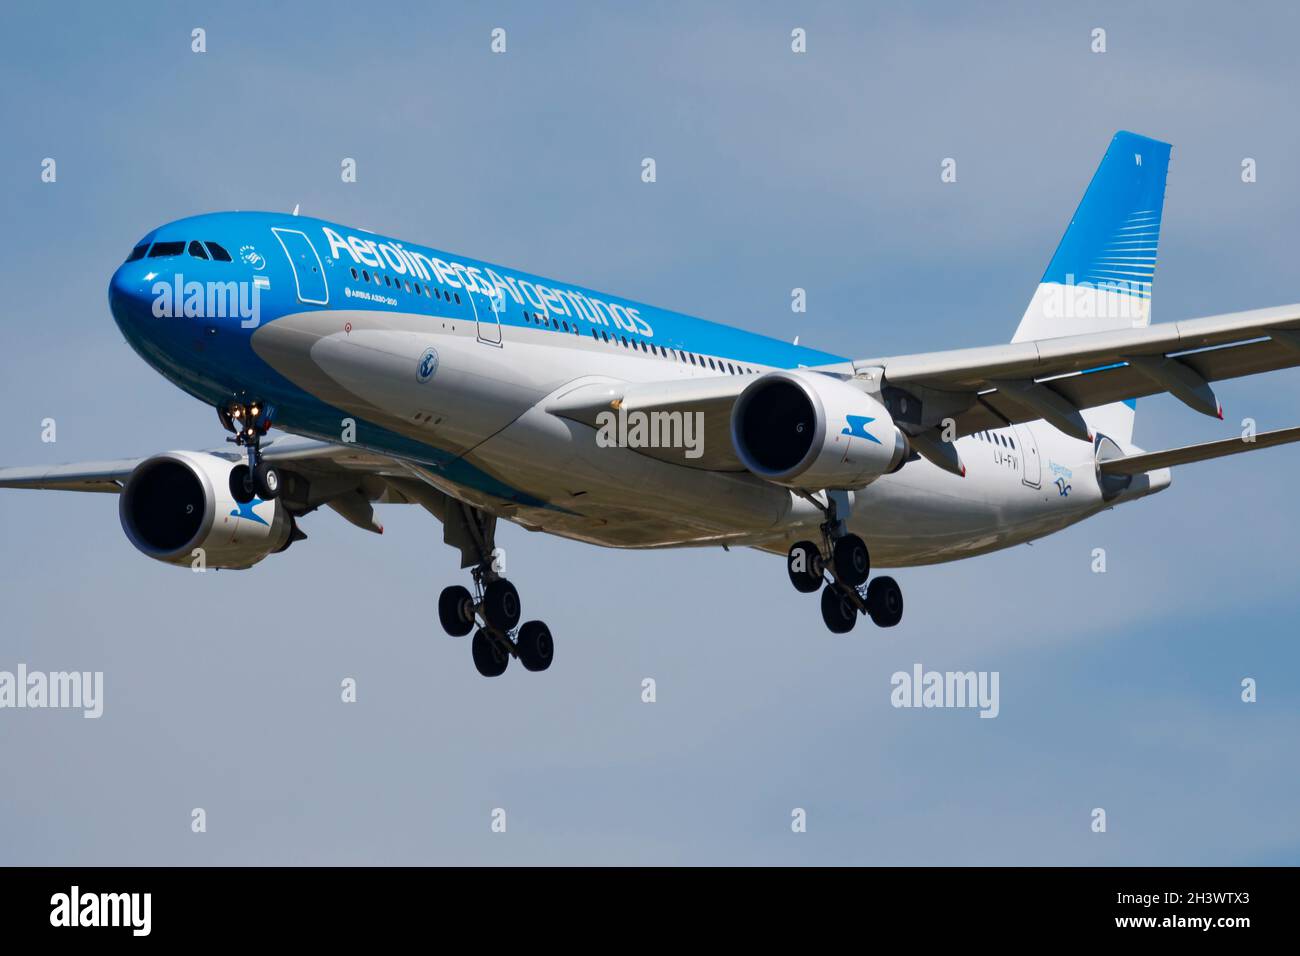 Madrid, Spain - May 4, 2016: Aerolineas Argentinas passenger plane at airport. Schedule flight travel. Aviation and aircraft. Air transport. Global in Stock Photo